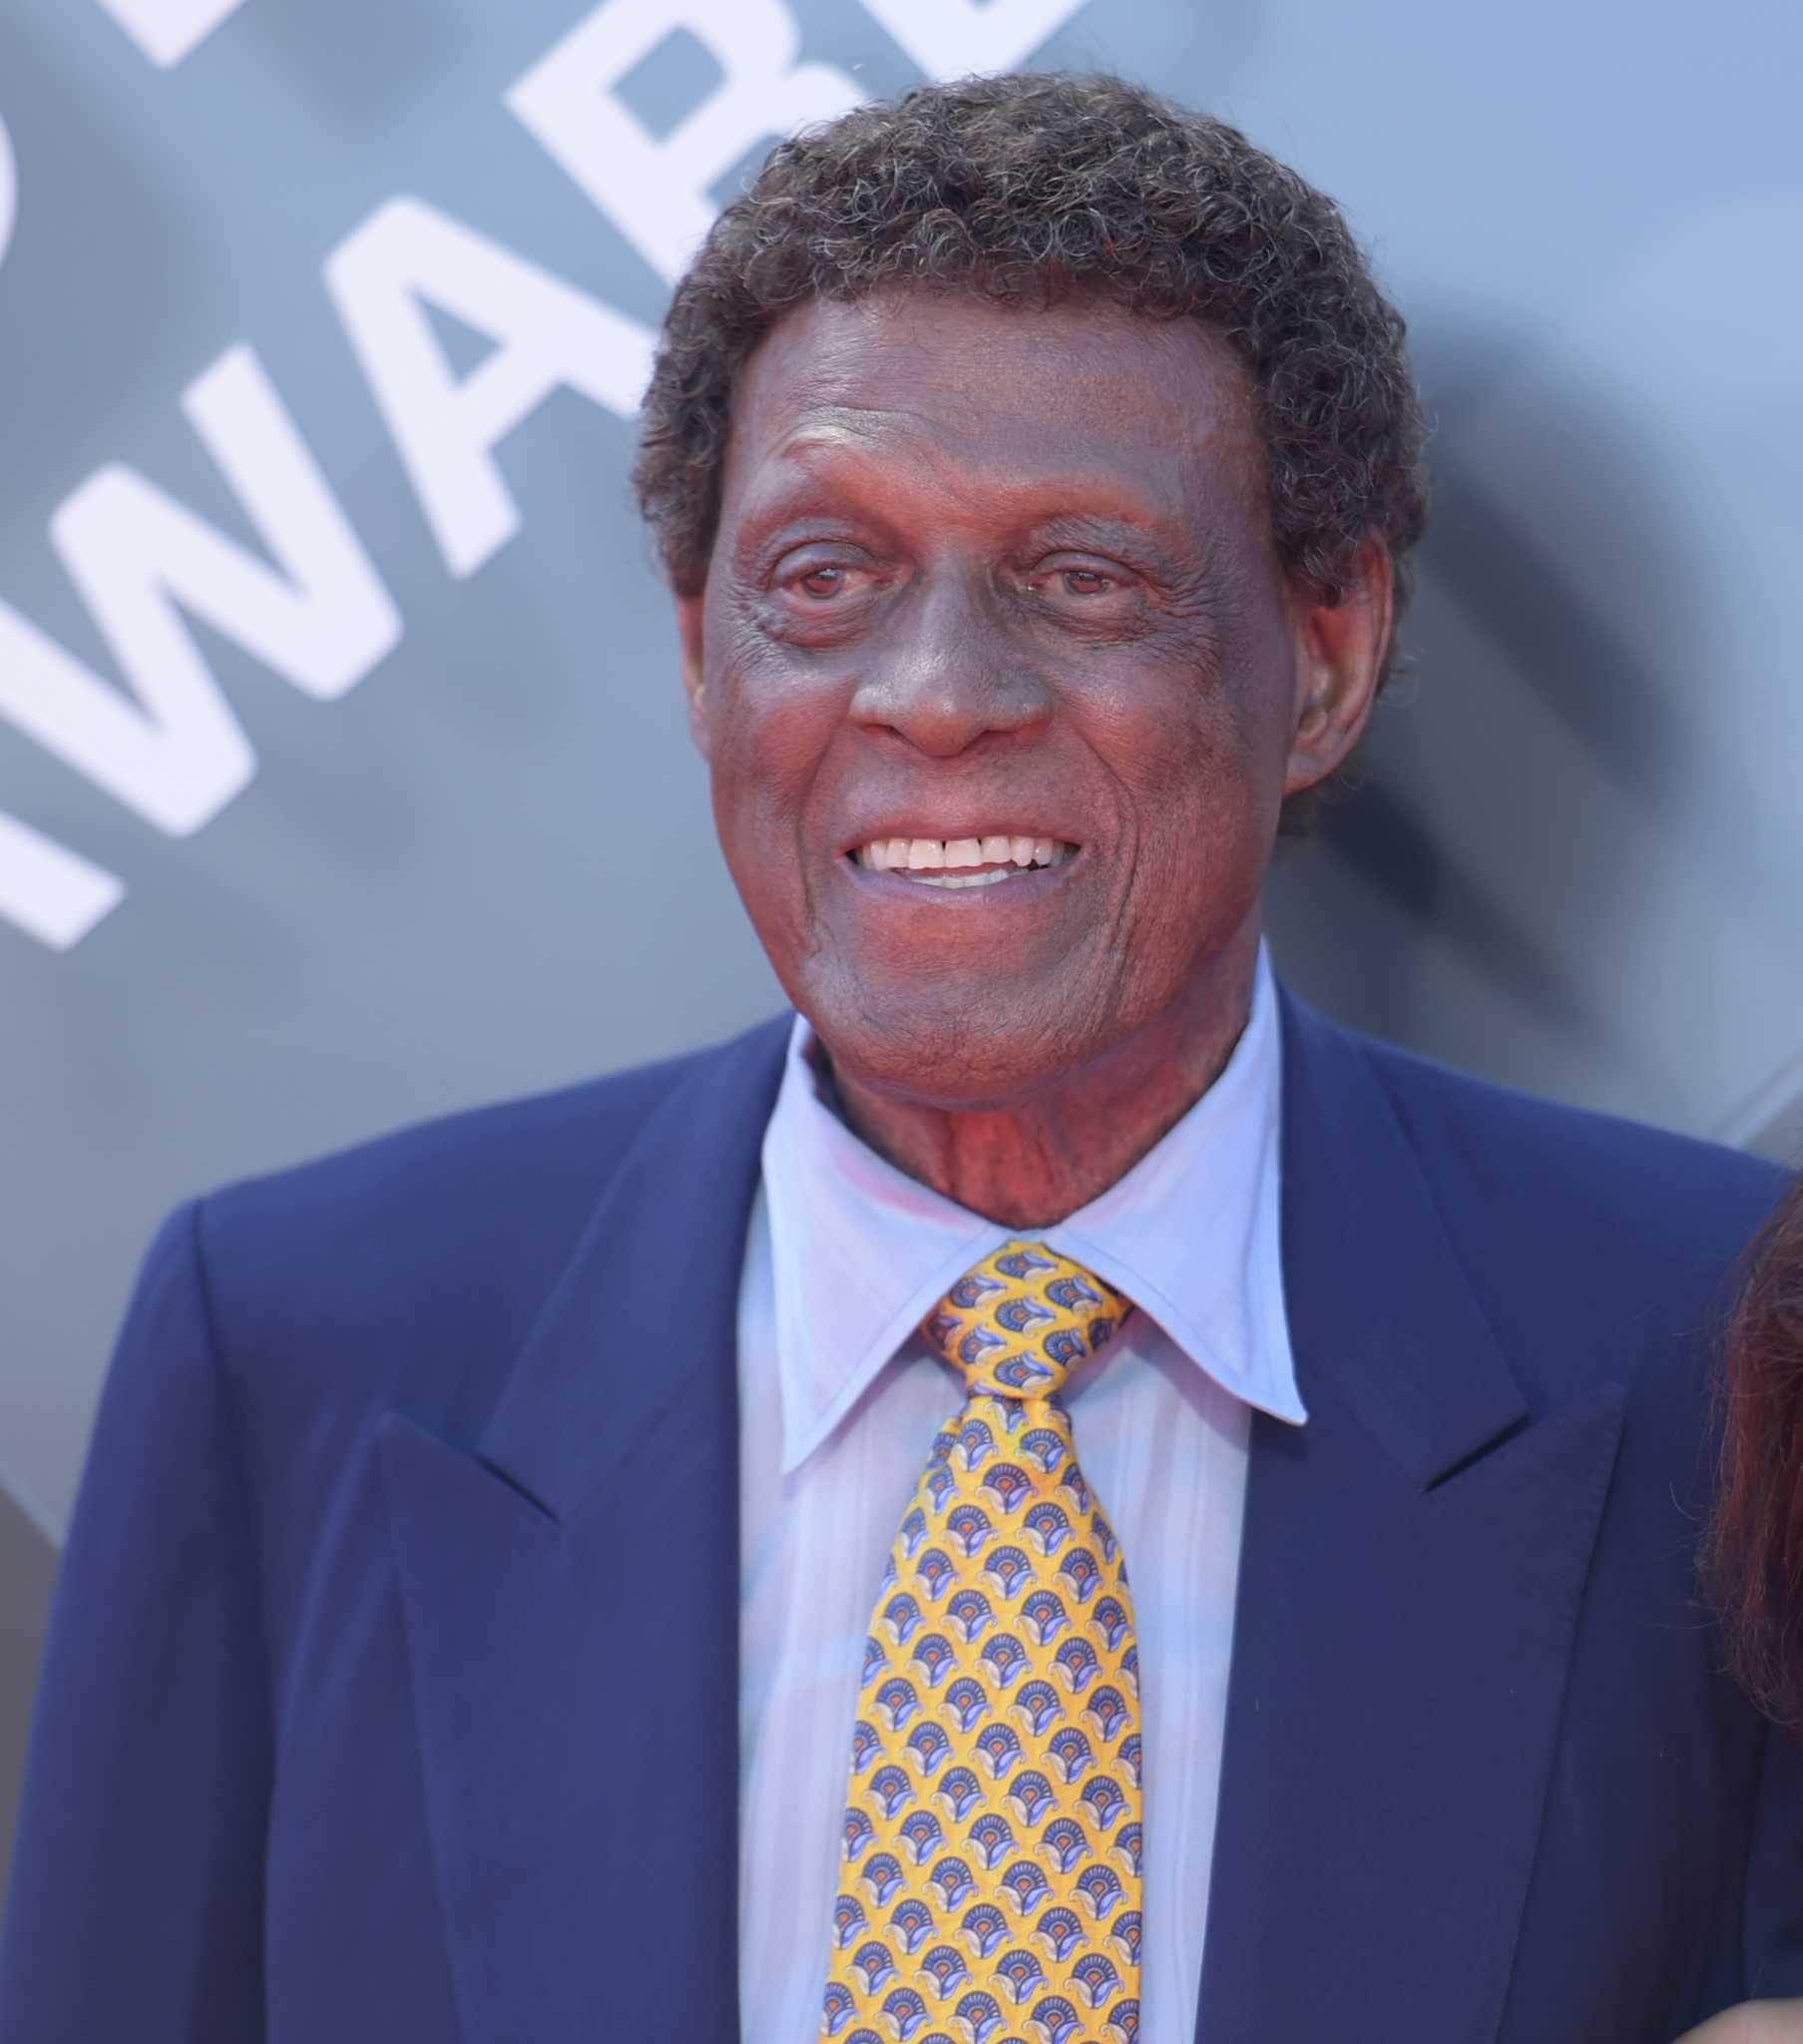 Elgin Baylor, Lakers Hall of Famer and 11-time NBA All Star, dies at 86